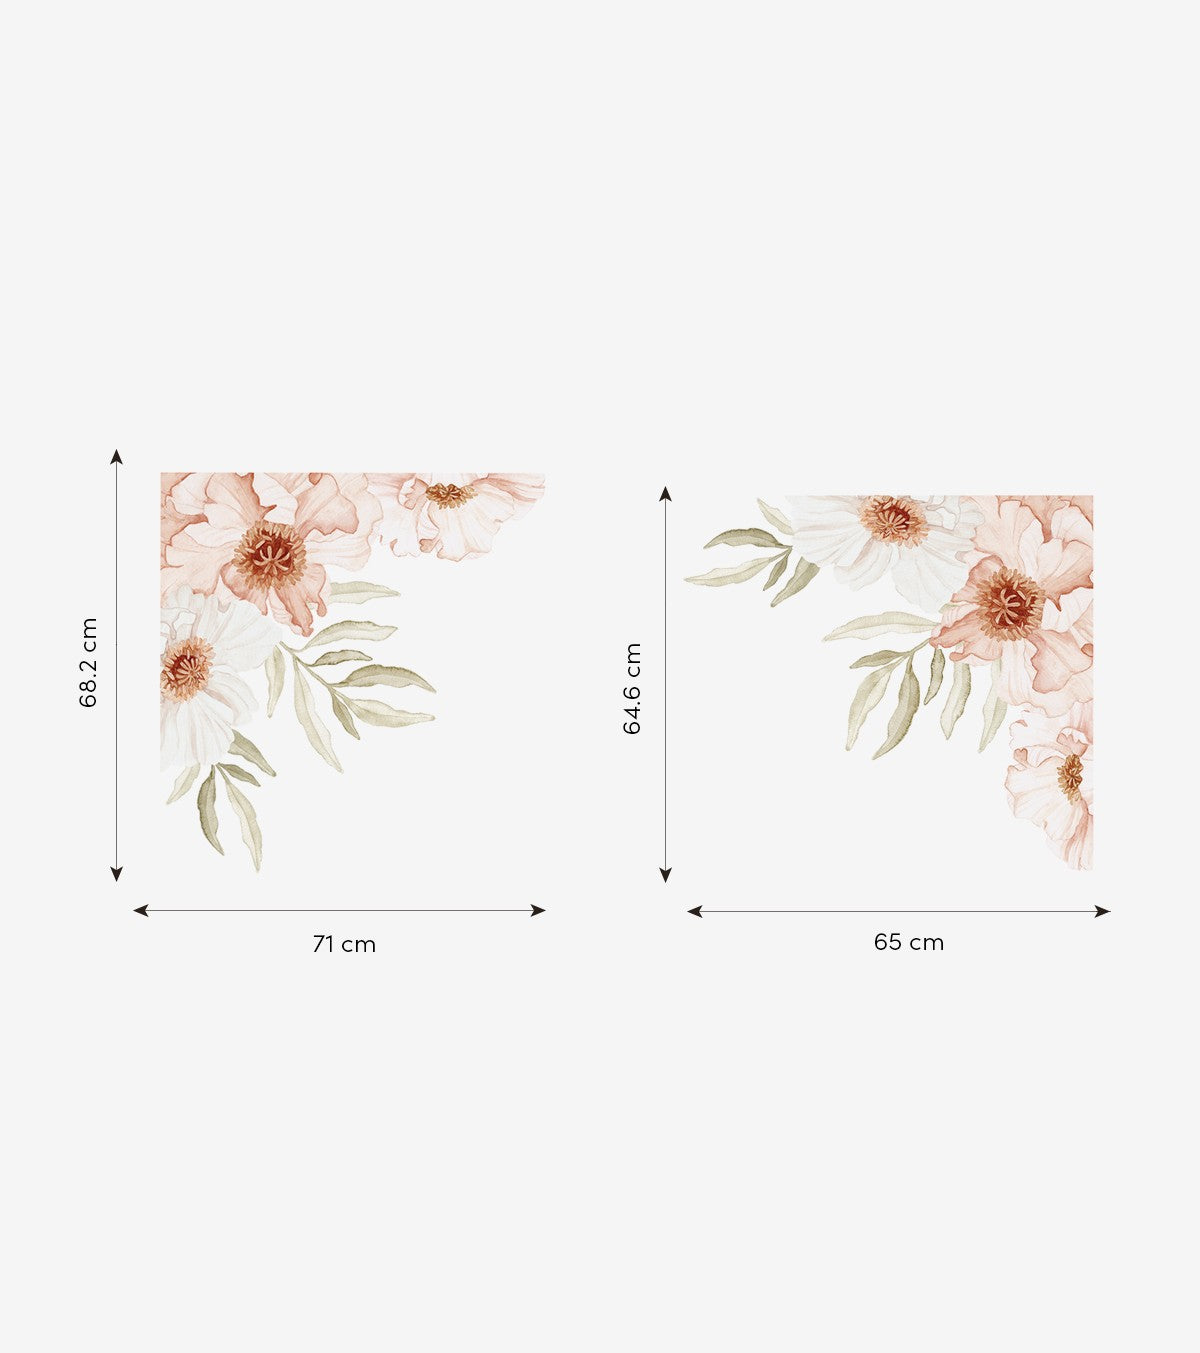 ISLANDIC POPPIES - Wall decals muraux - Large bouquets